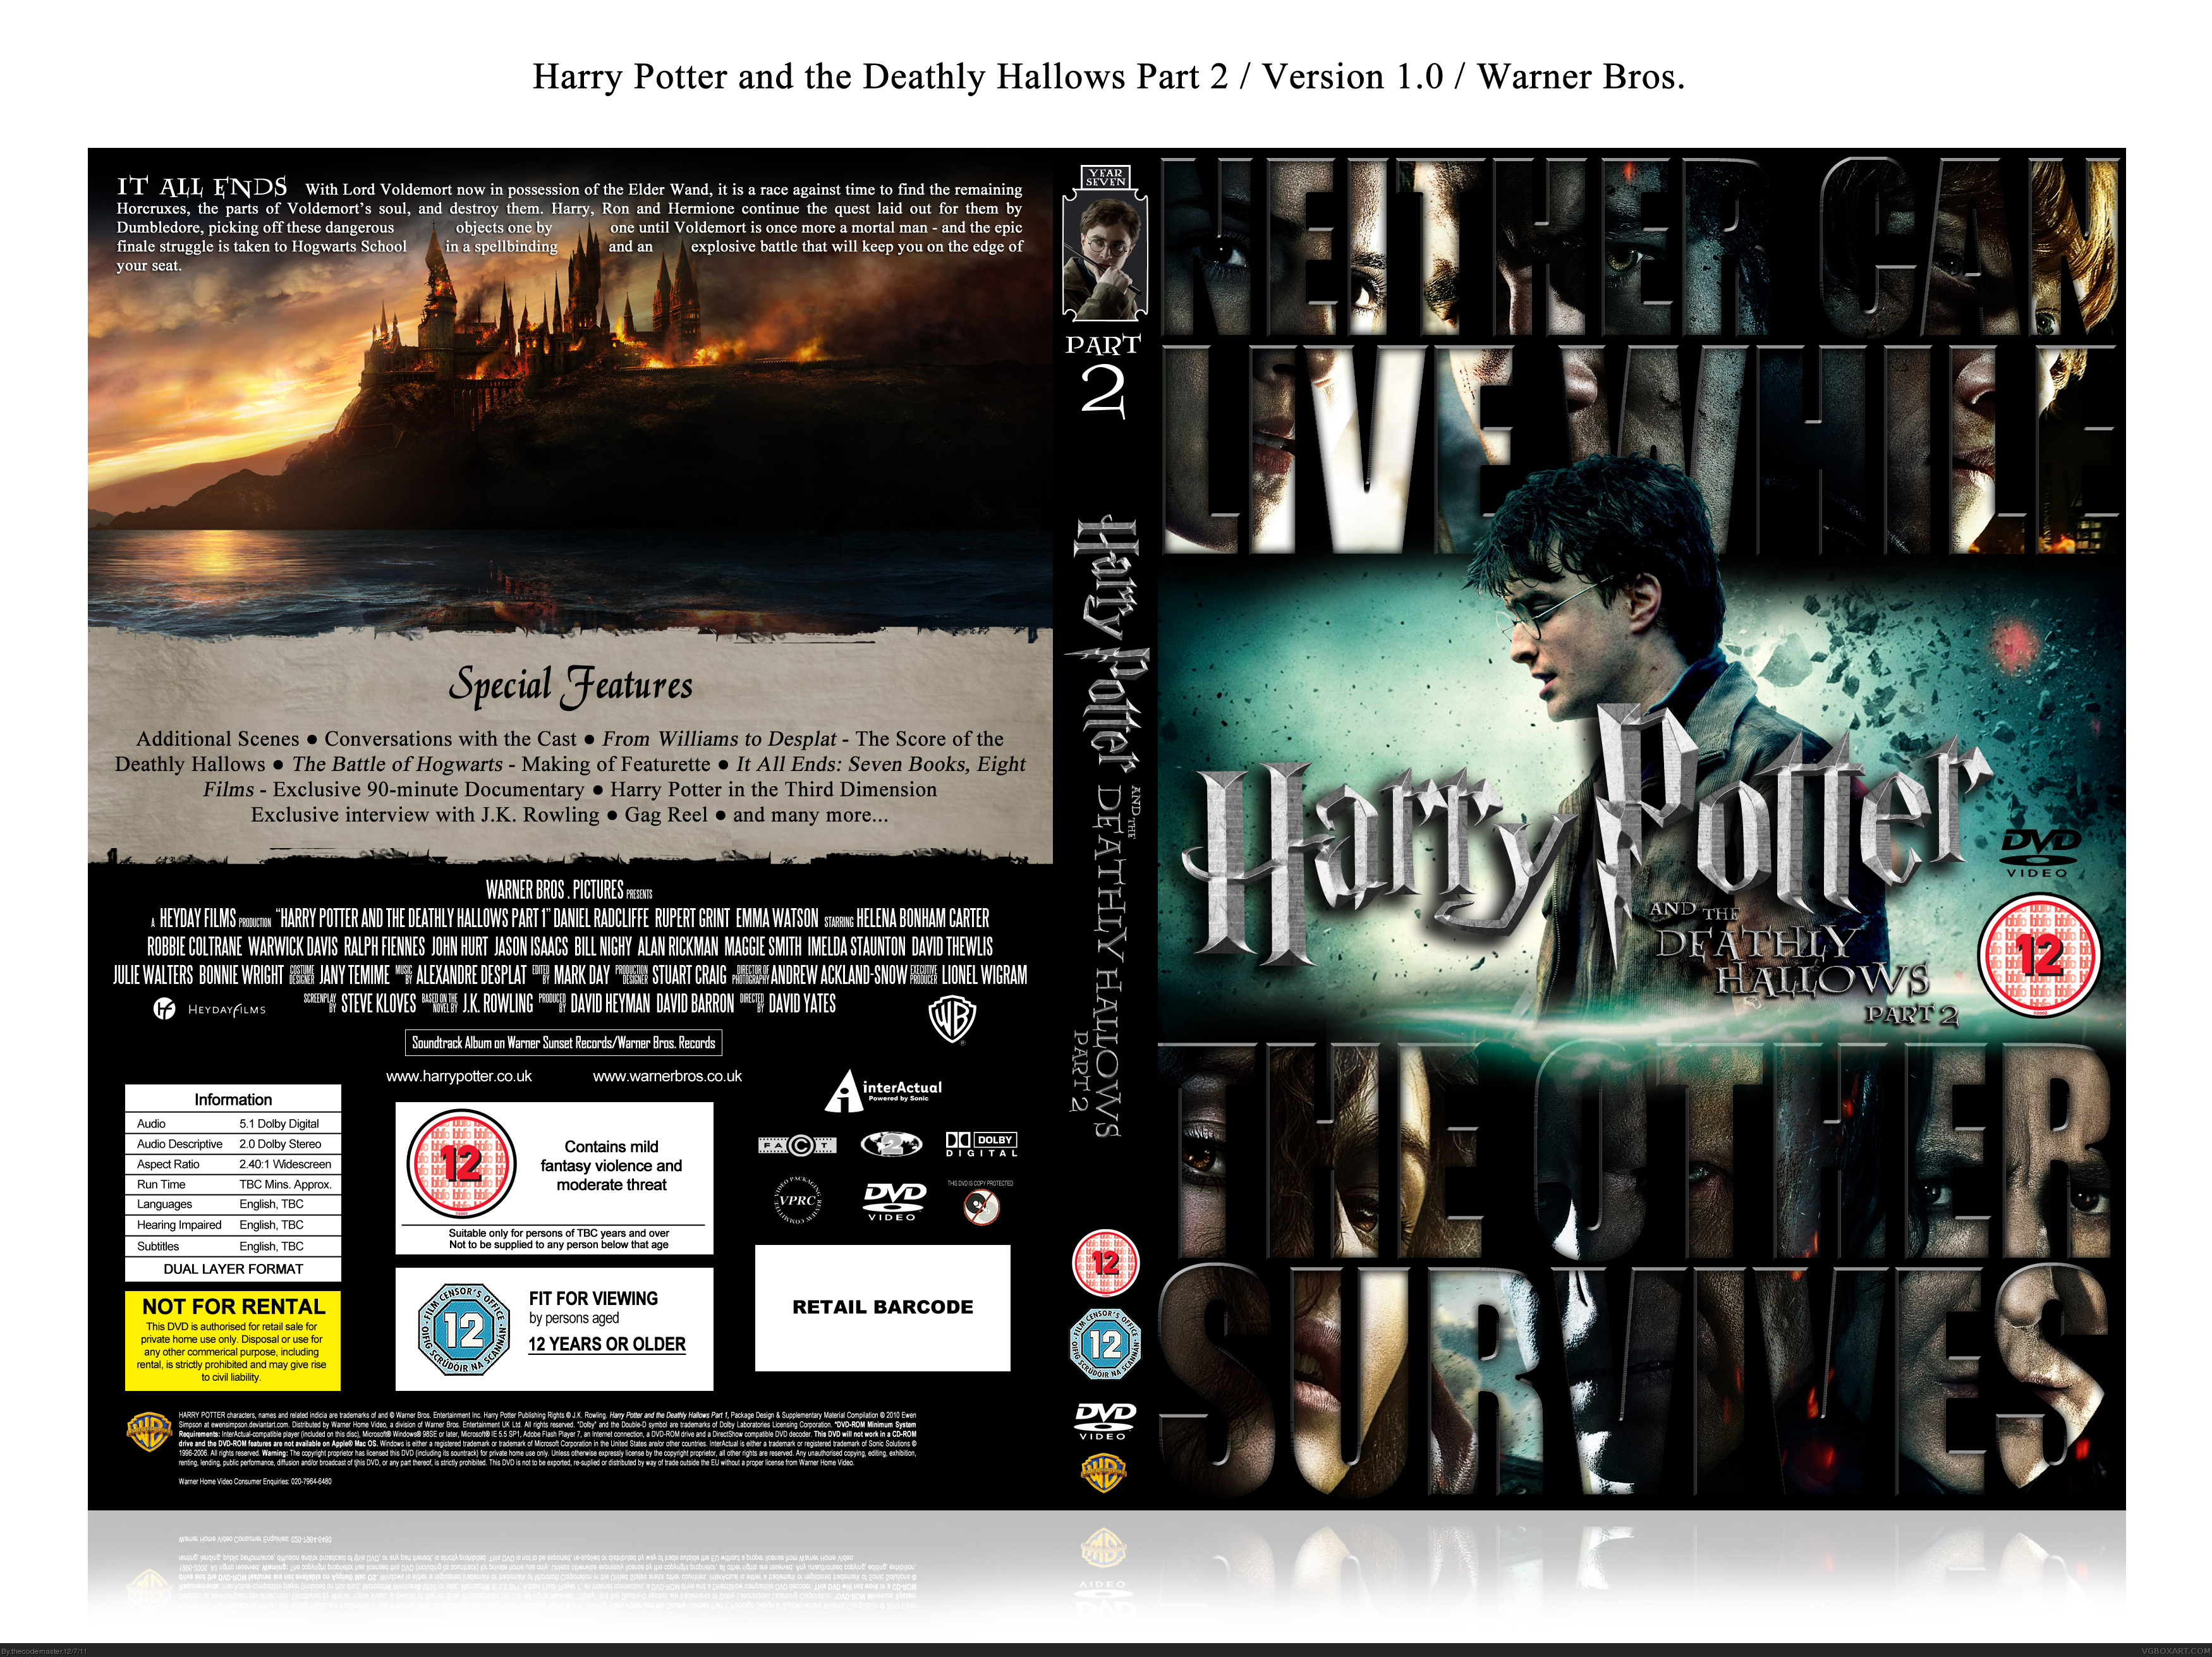 Harry Potter and the Deathly Hallows: Part 2 box cover